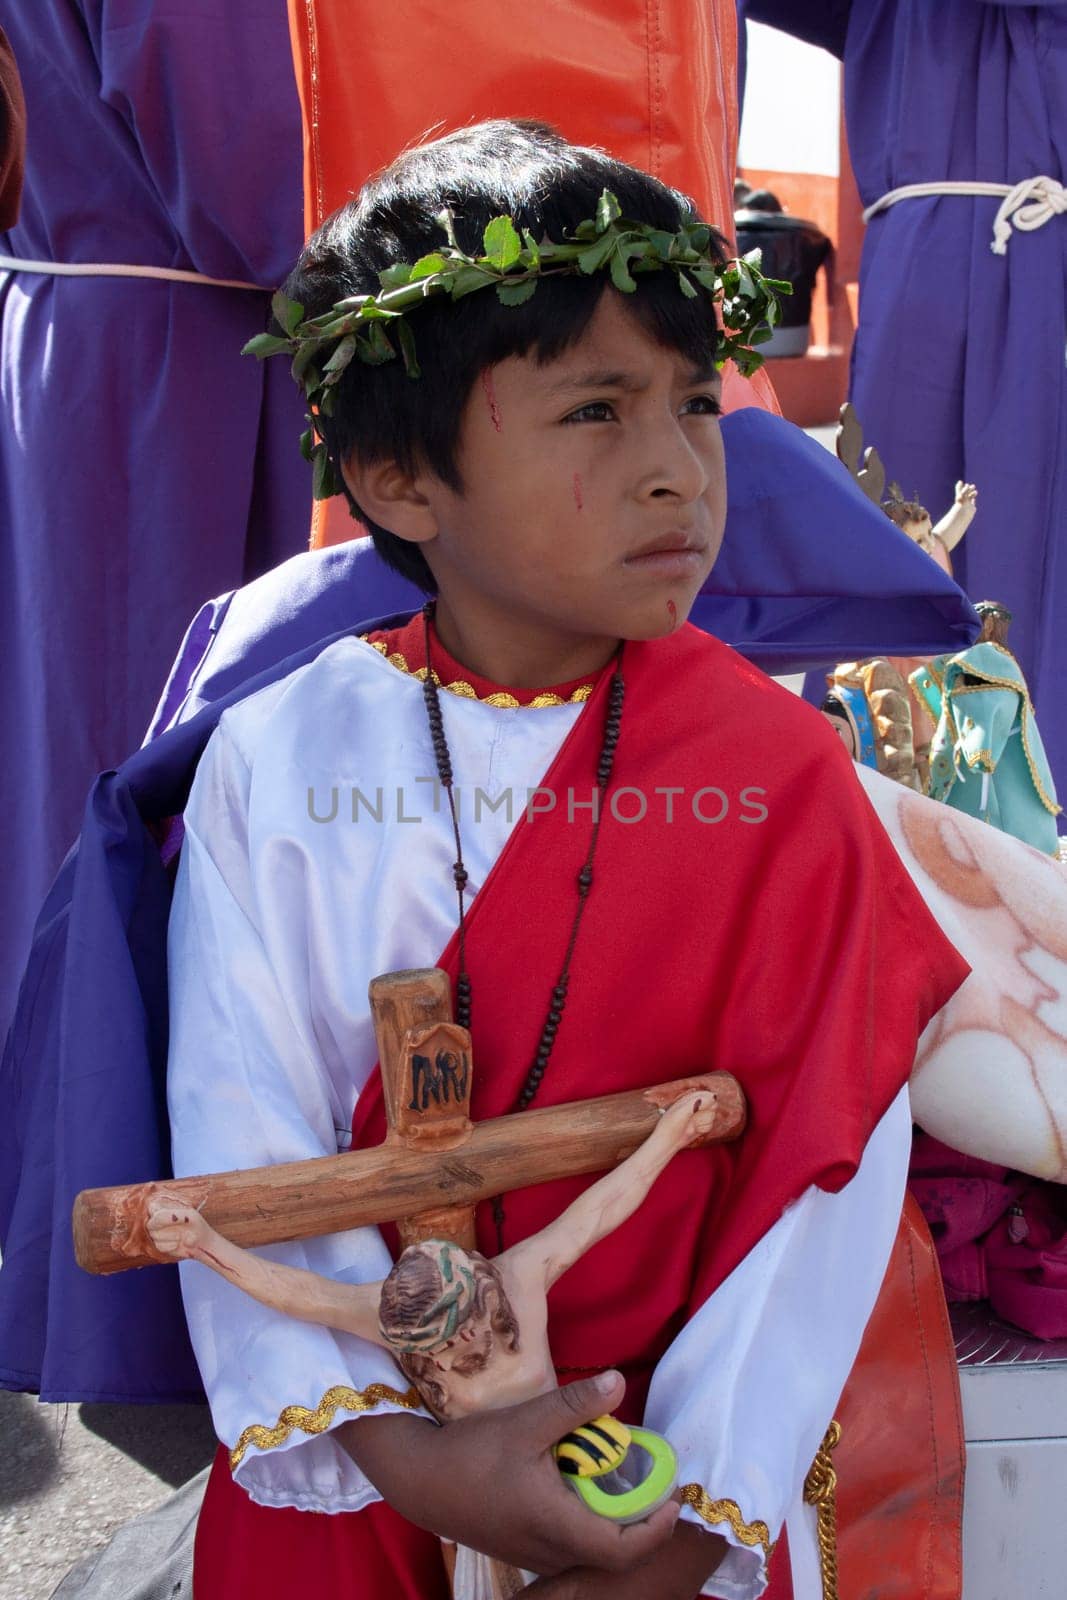 child in a profession of holy week dressed with a large cross of jesus christ in his arms with a sad look by Raulmartin